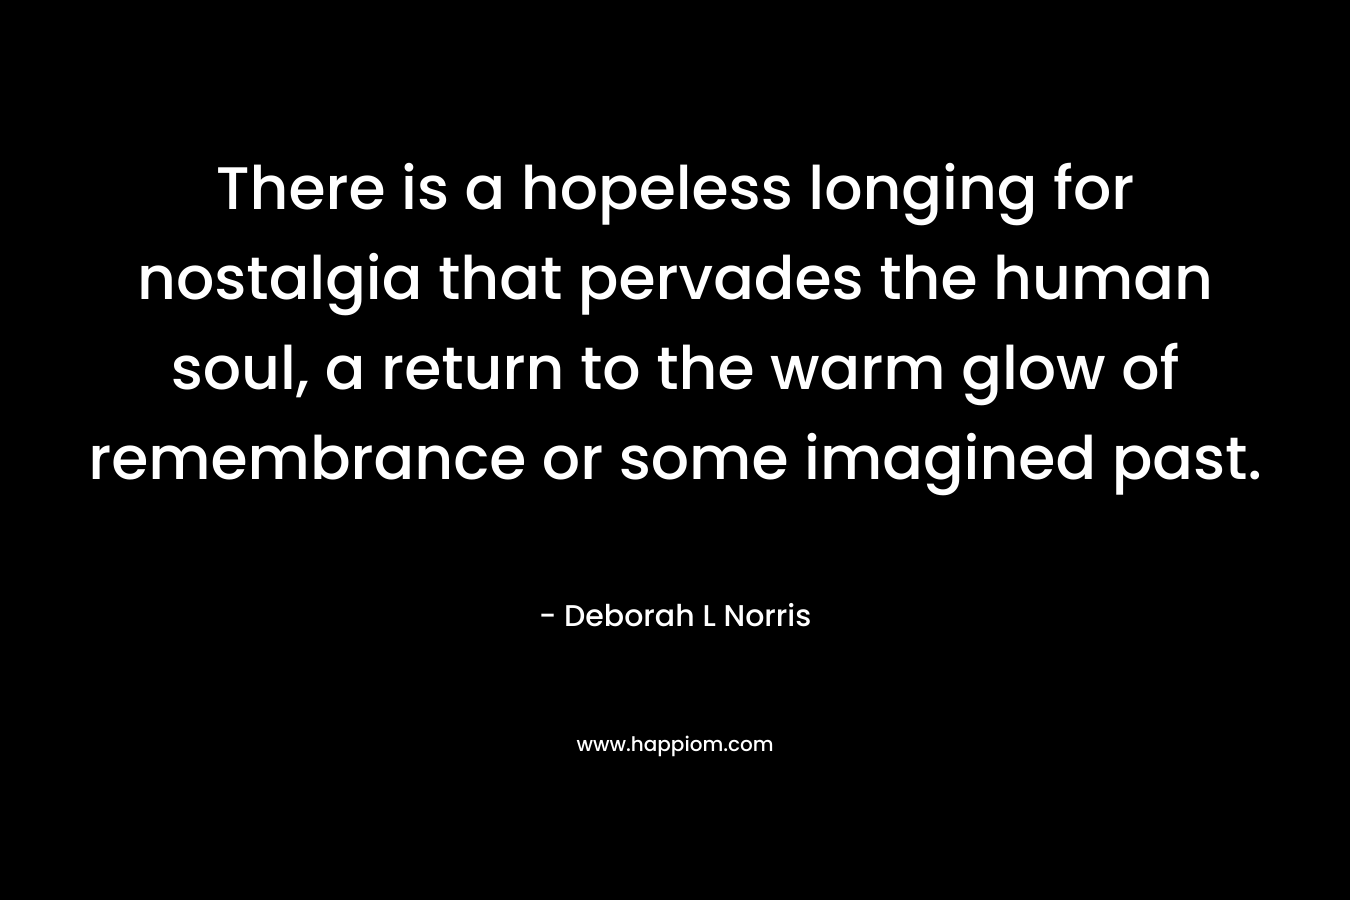 There is a hopeless longing for nostalgia that pervades the human soul, a return to the warm glow of remembrance or some imagined past.